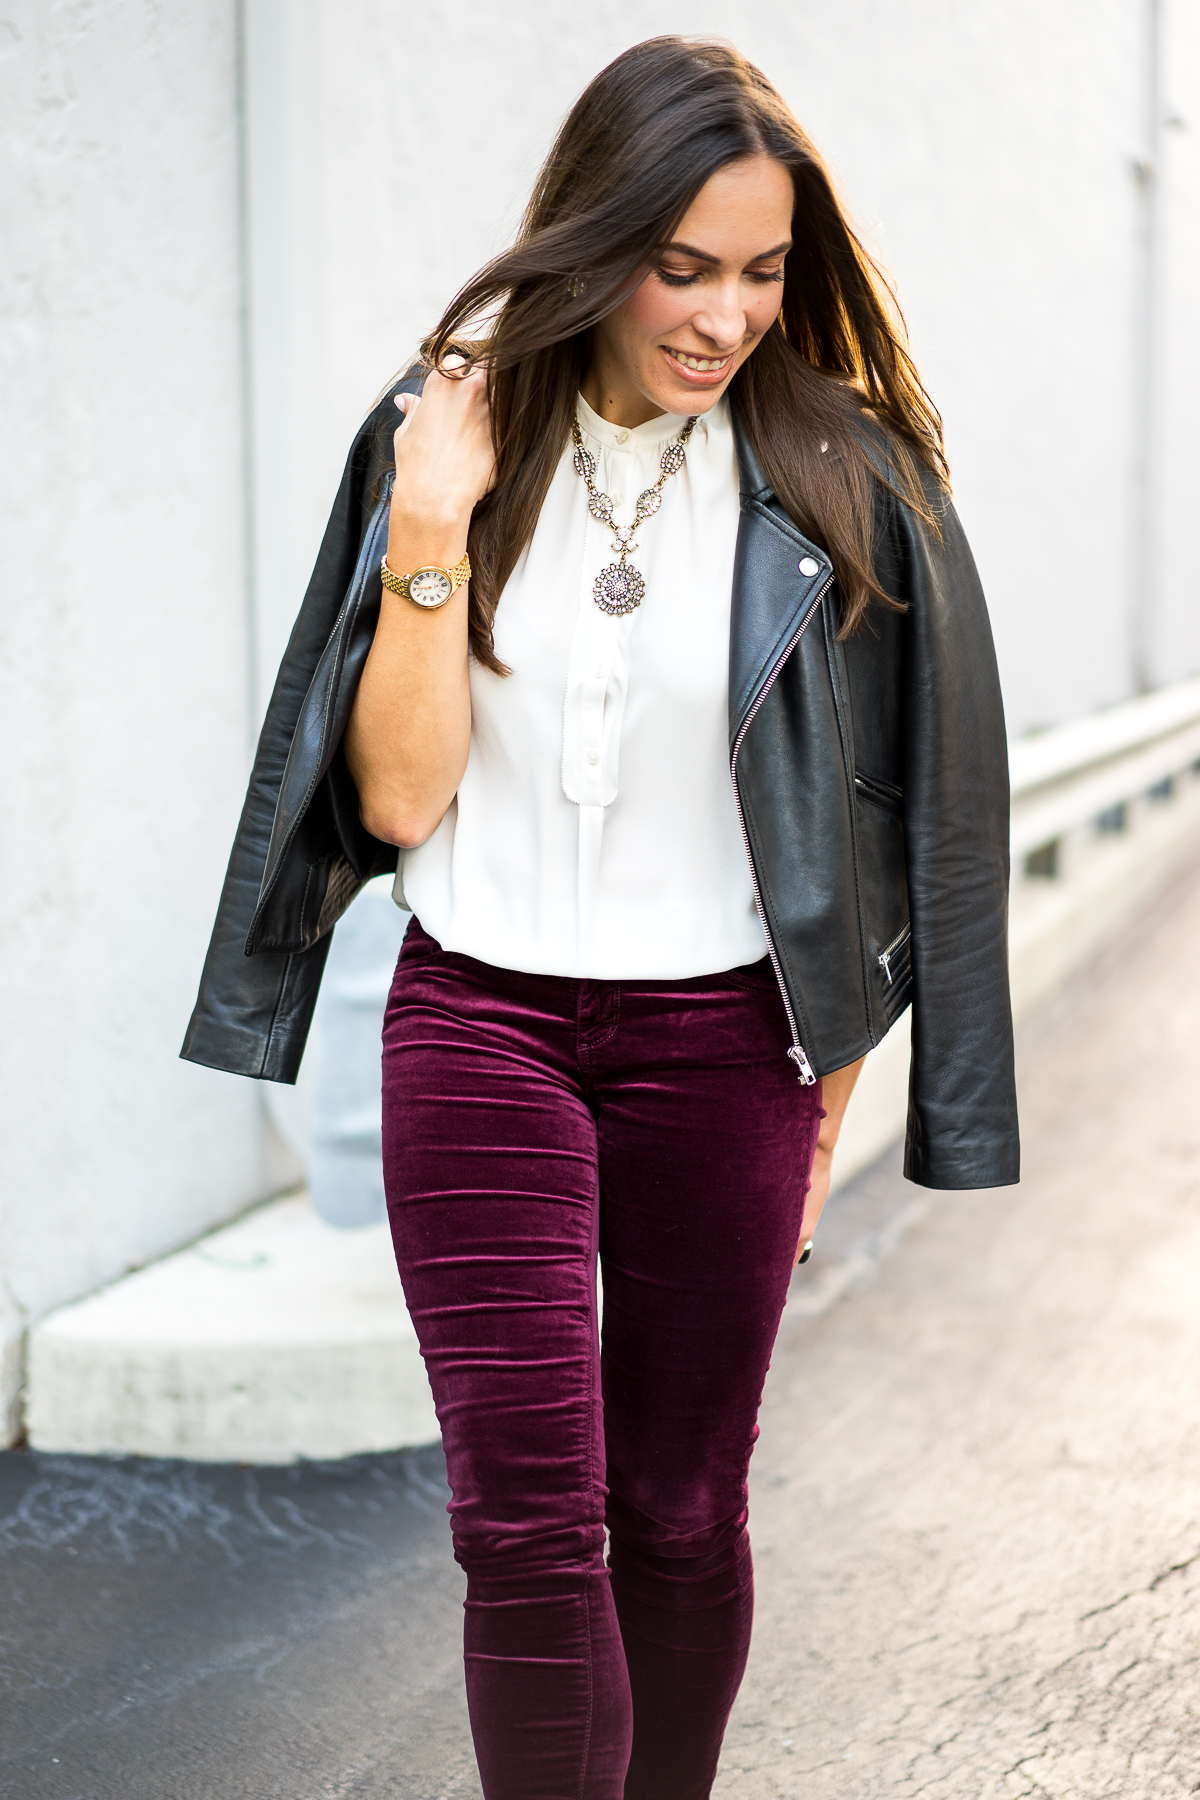 A Glam Lifestyle burgundy velvet jeans maje leather moto jacket aska collection troy booties 10